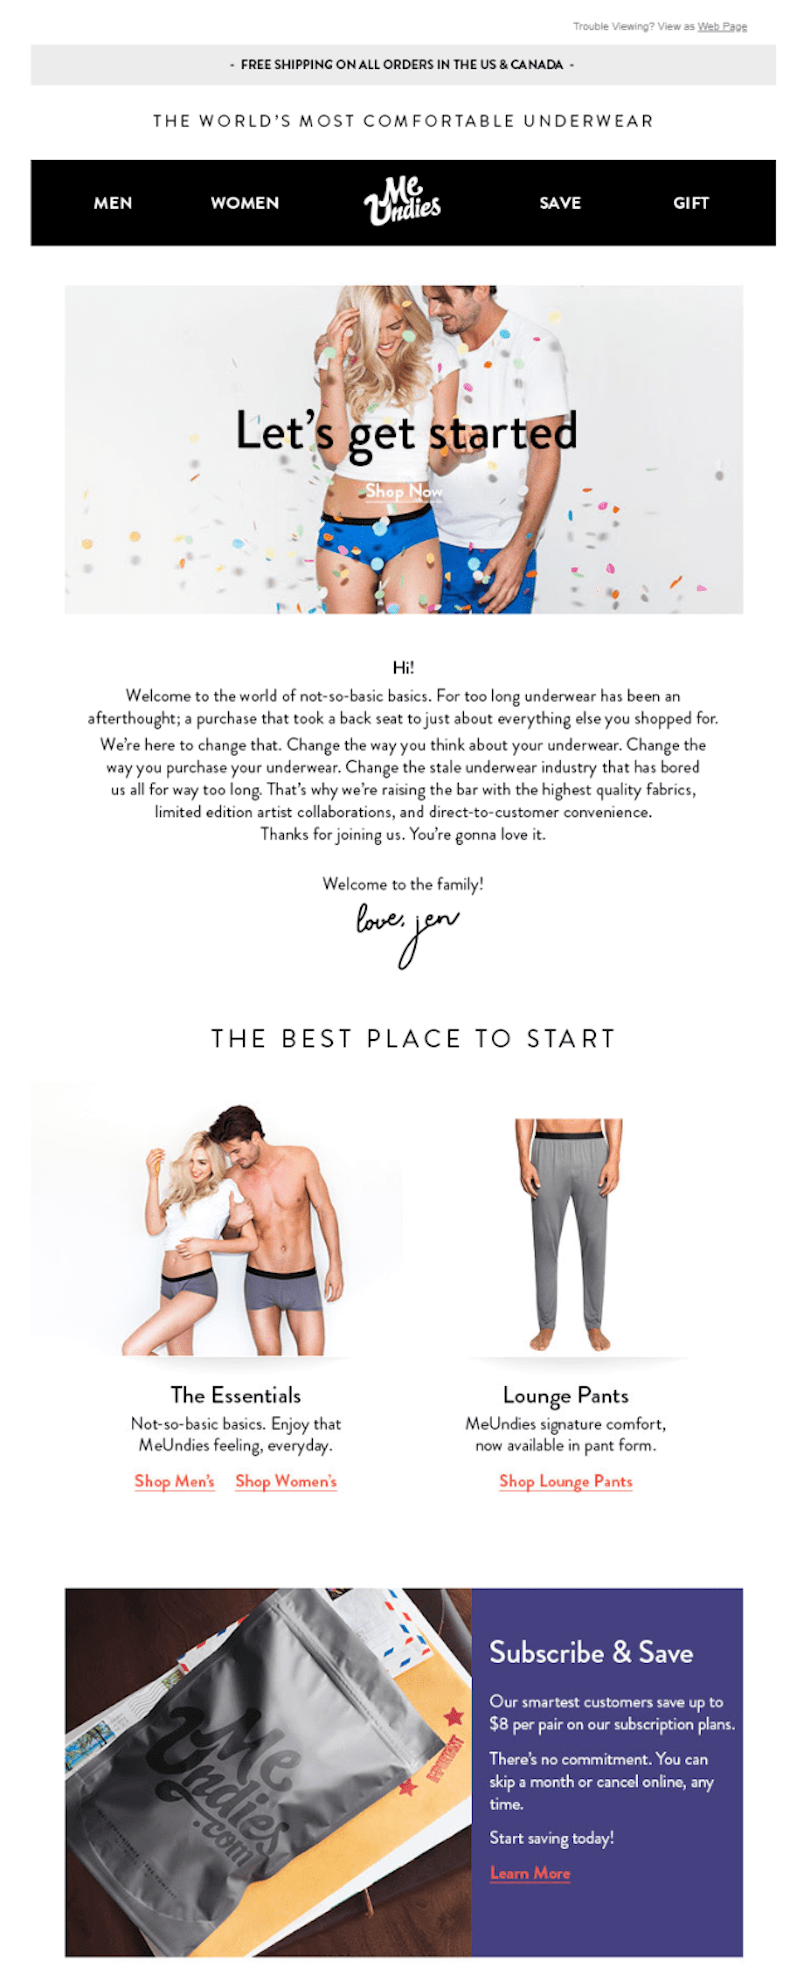 How MeUndies is using a membership model to grow its business